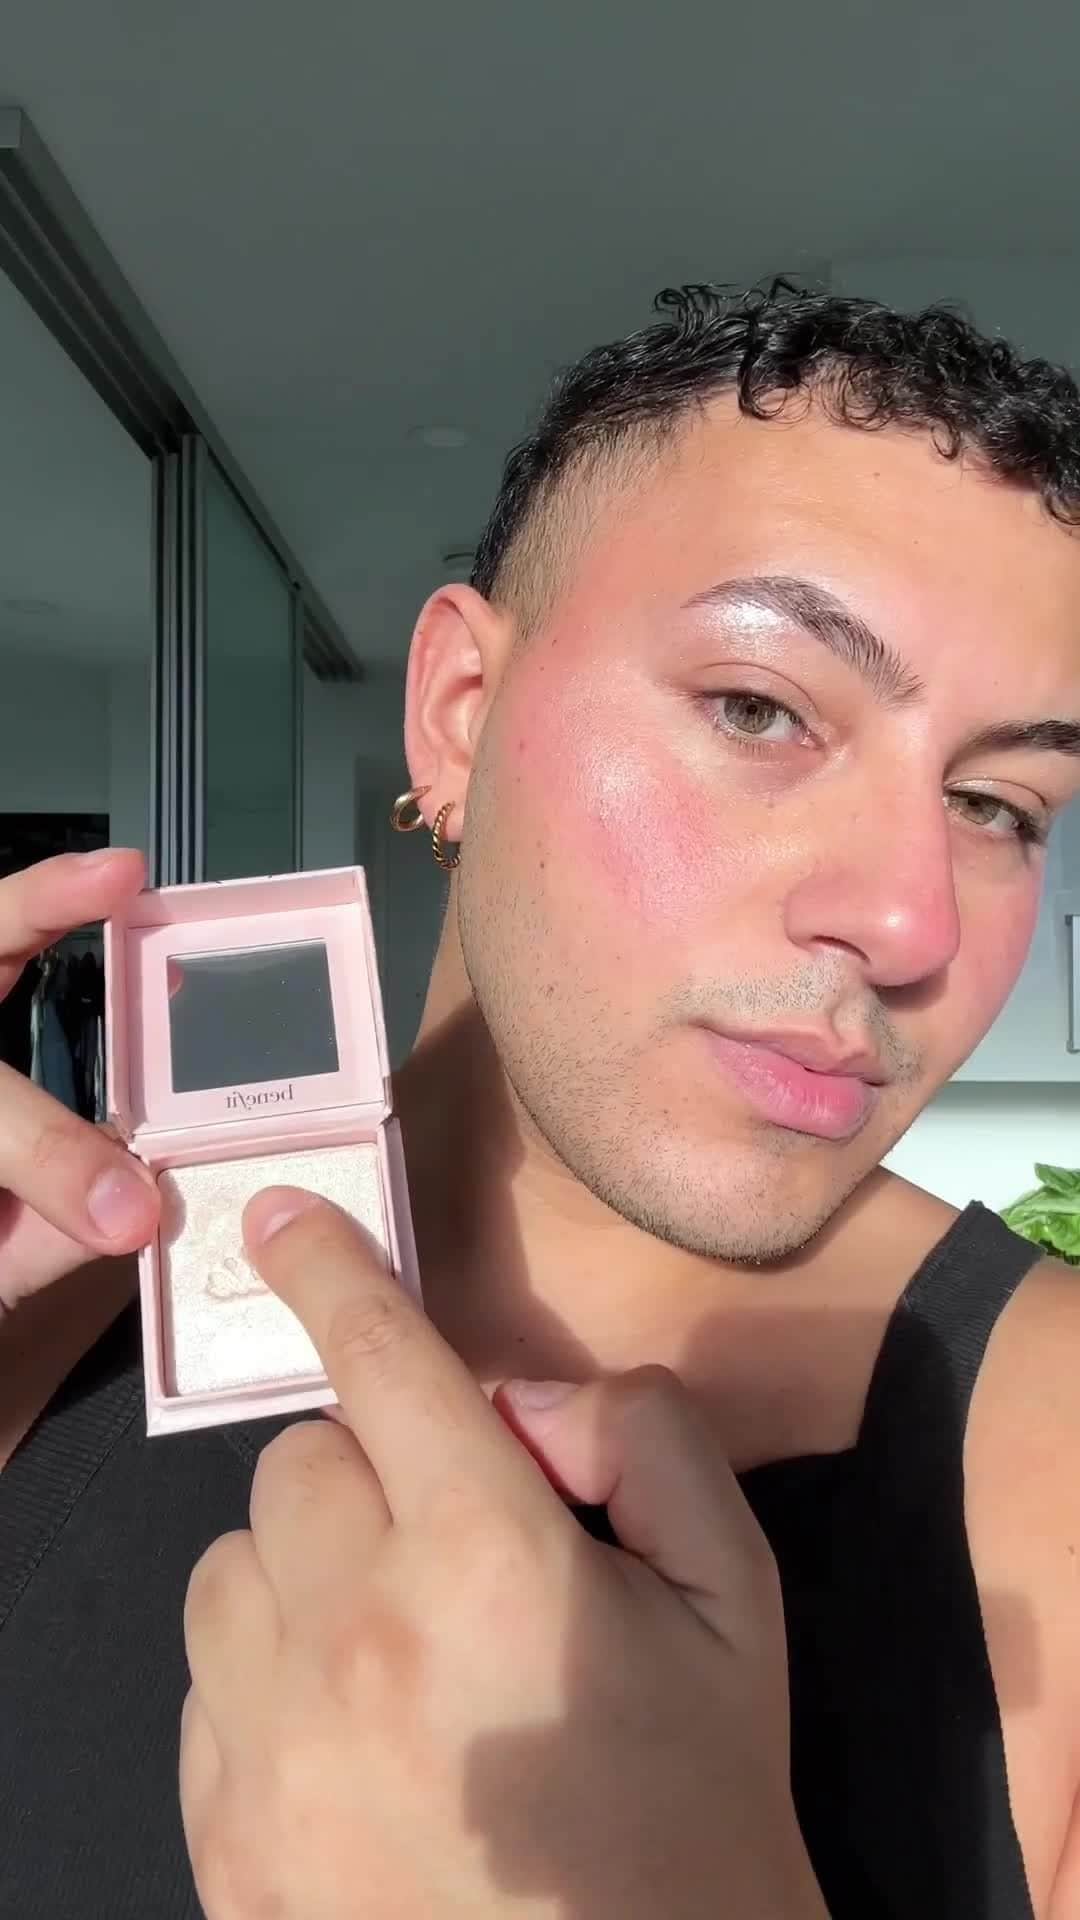 Benefit Cosmeticsのインスタグラム：「Comment down below @minagerges's costume! You could say he's feline himself ⁠🦁😉 ⁠ ⁠ The essentials:⁠ #24hrbrowsetter⁠ #cookiehighlighter⁠ #benefitblush in Crystah⁠ ⁠ #benefitcosmetics #halloween #makeup」